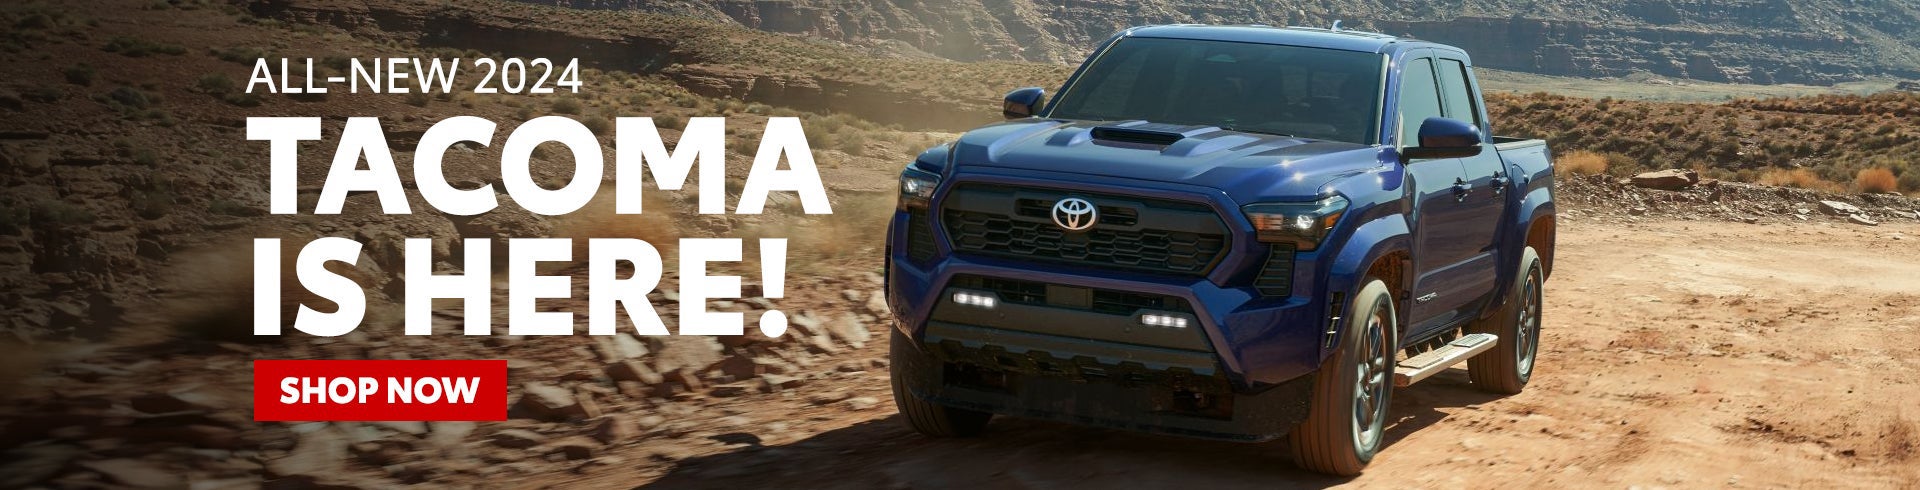 2024 Tacoma is Here!